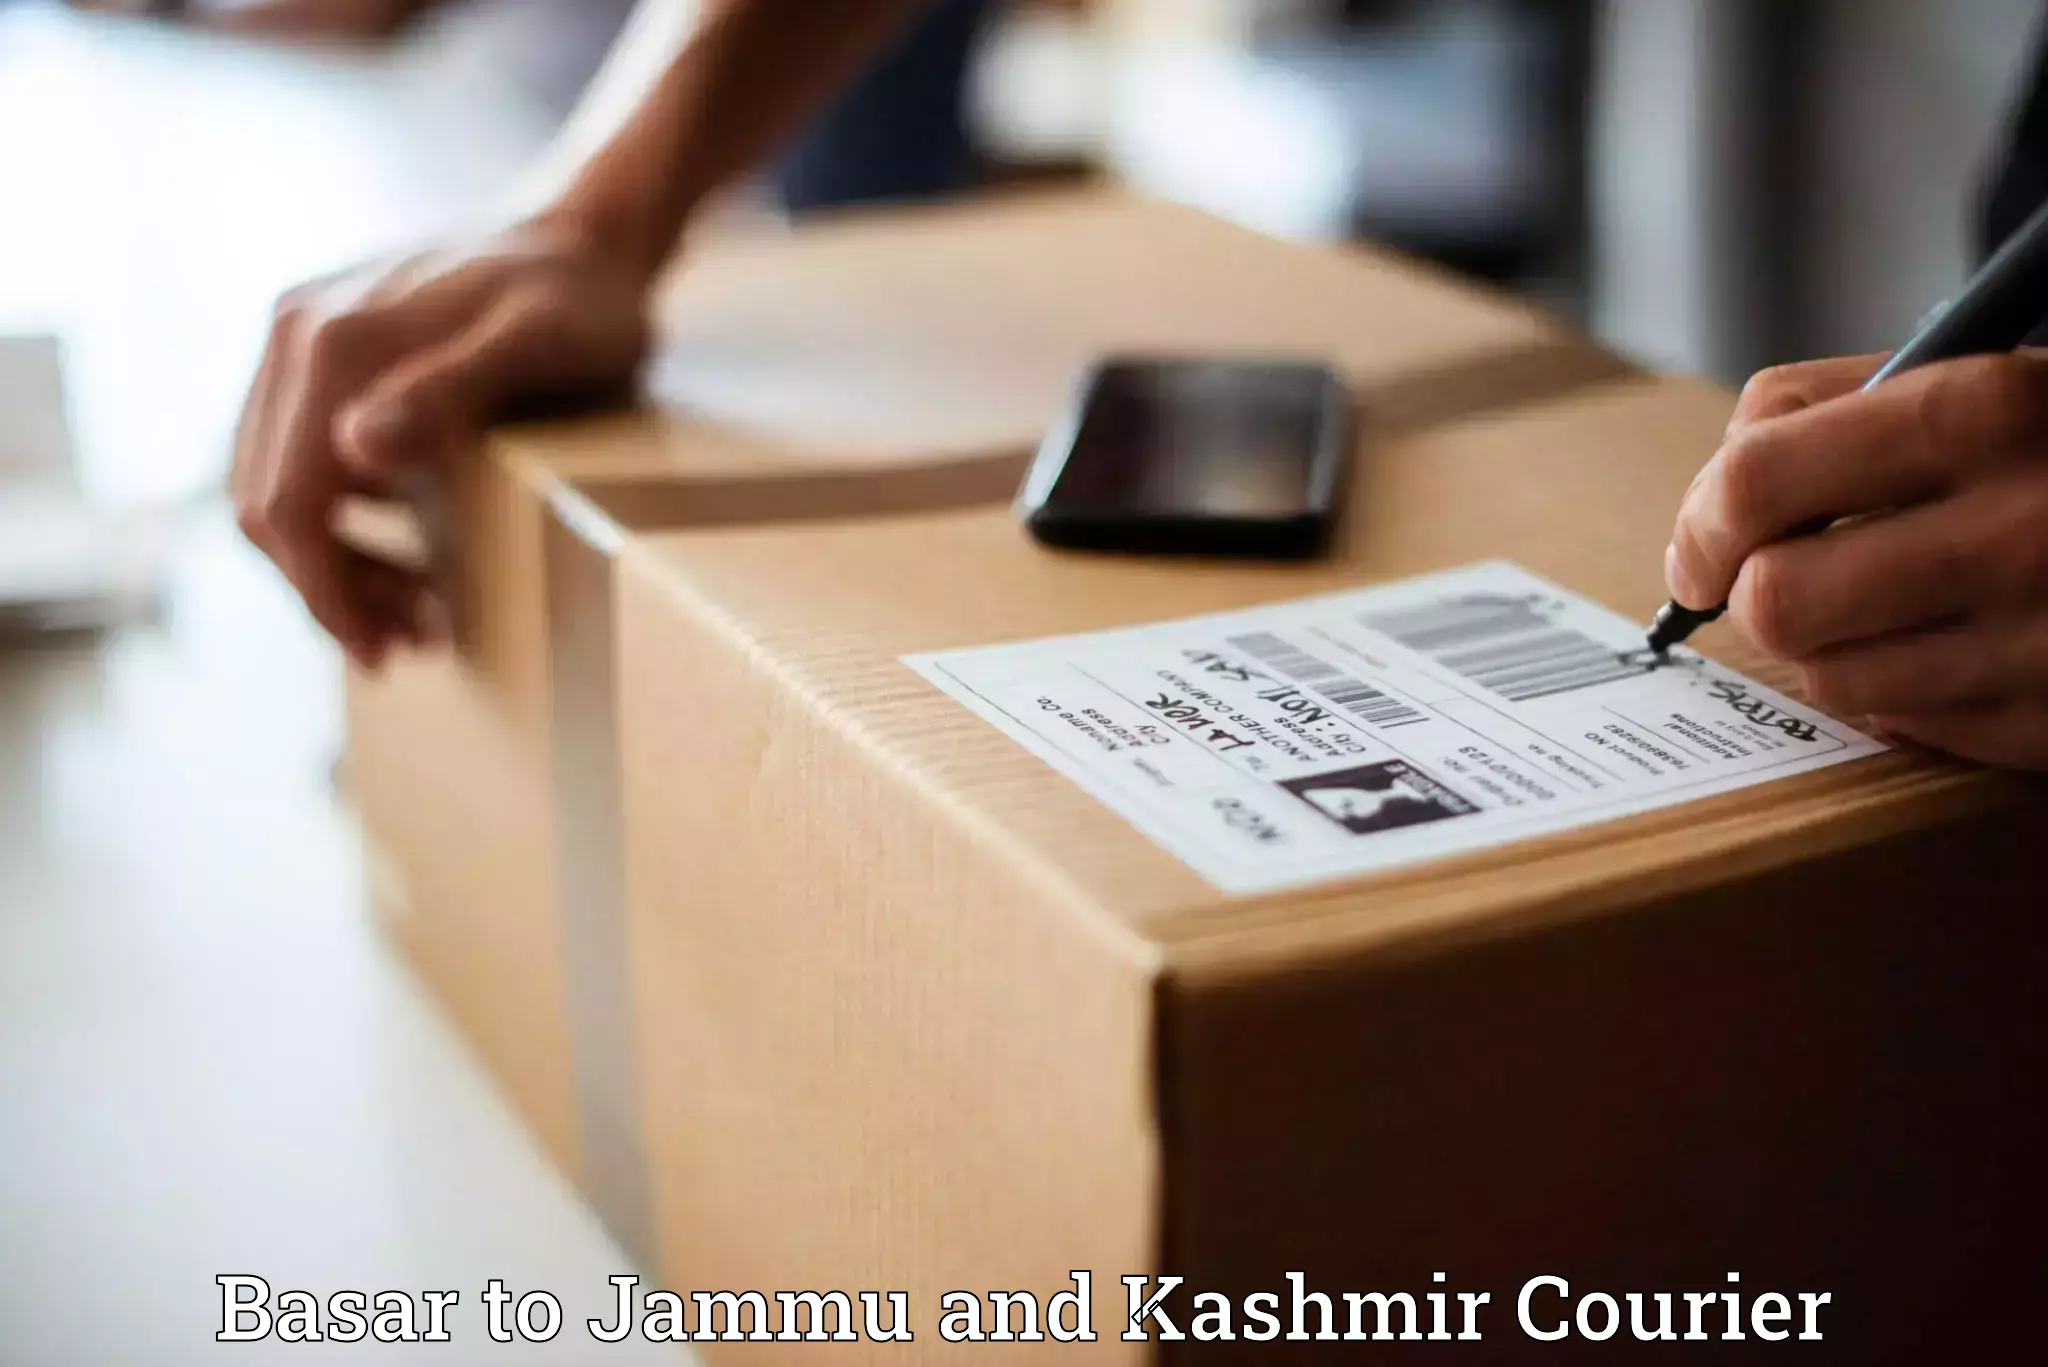 Subscription-based courier Basar to Jammu and Kashmir